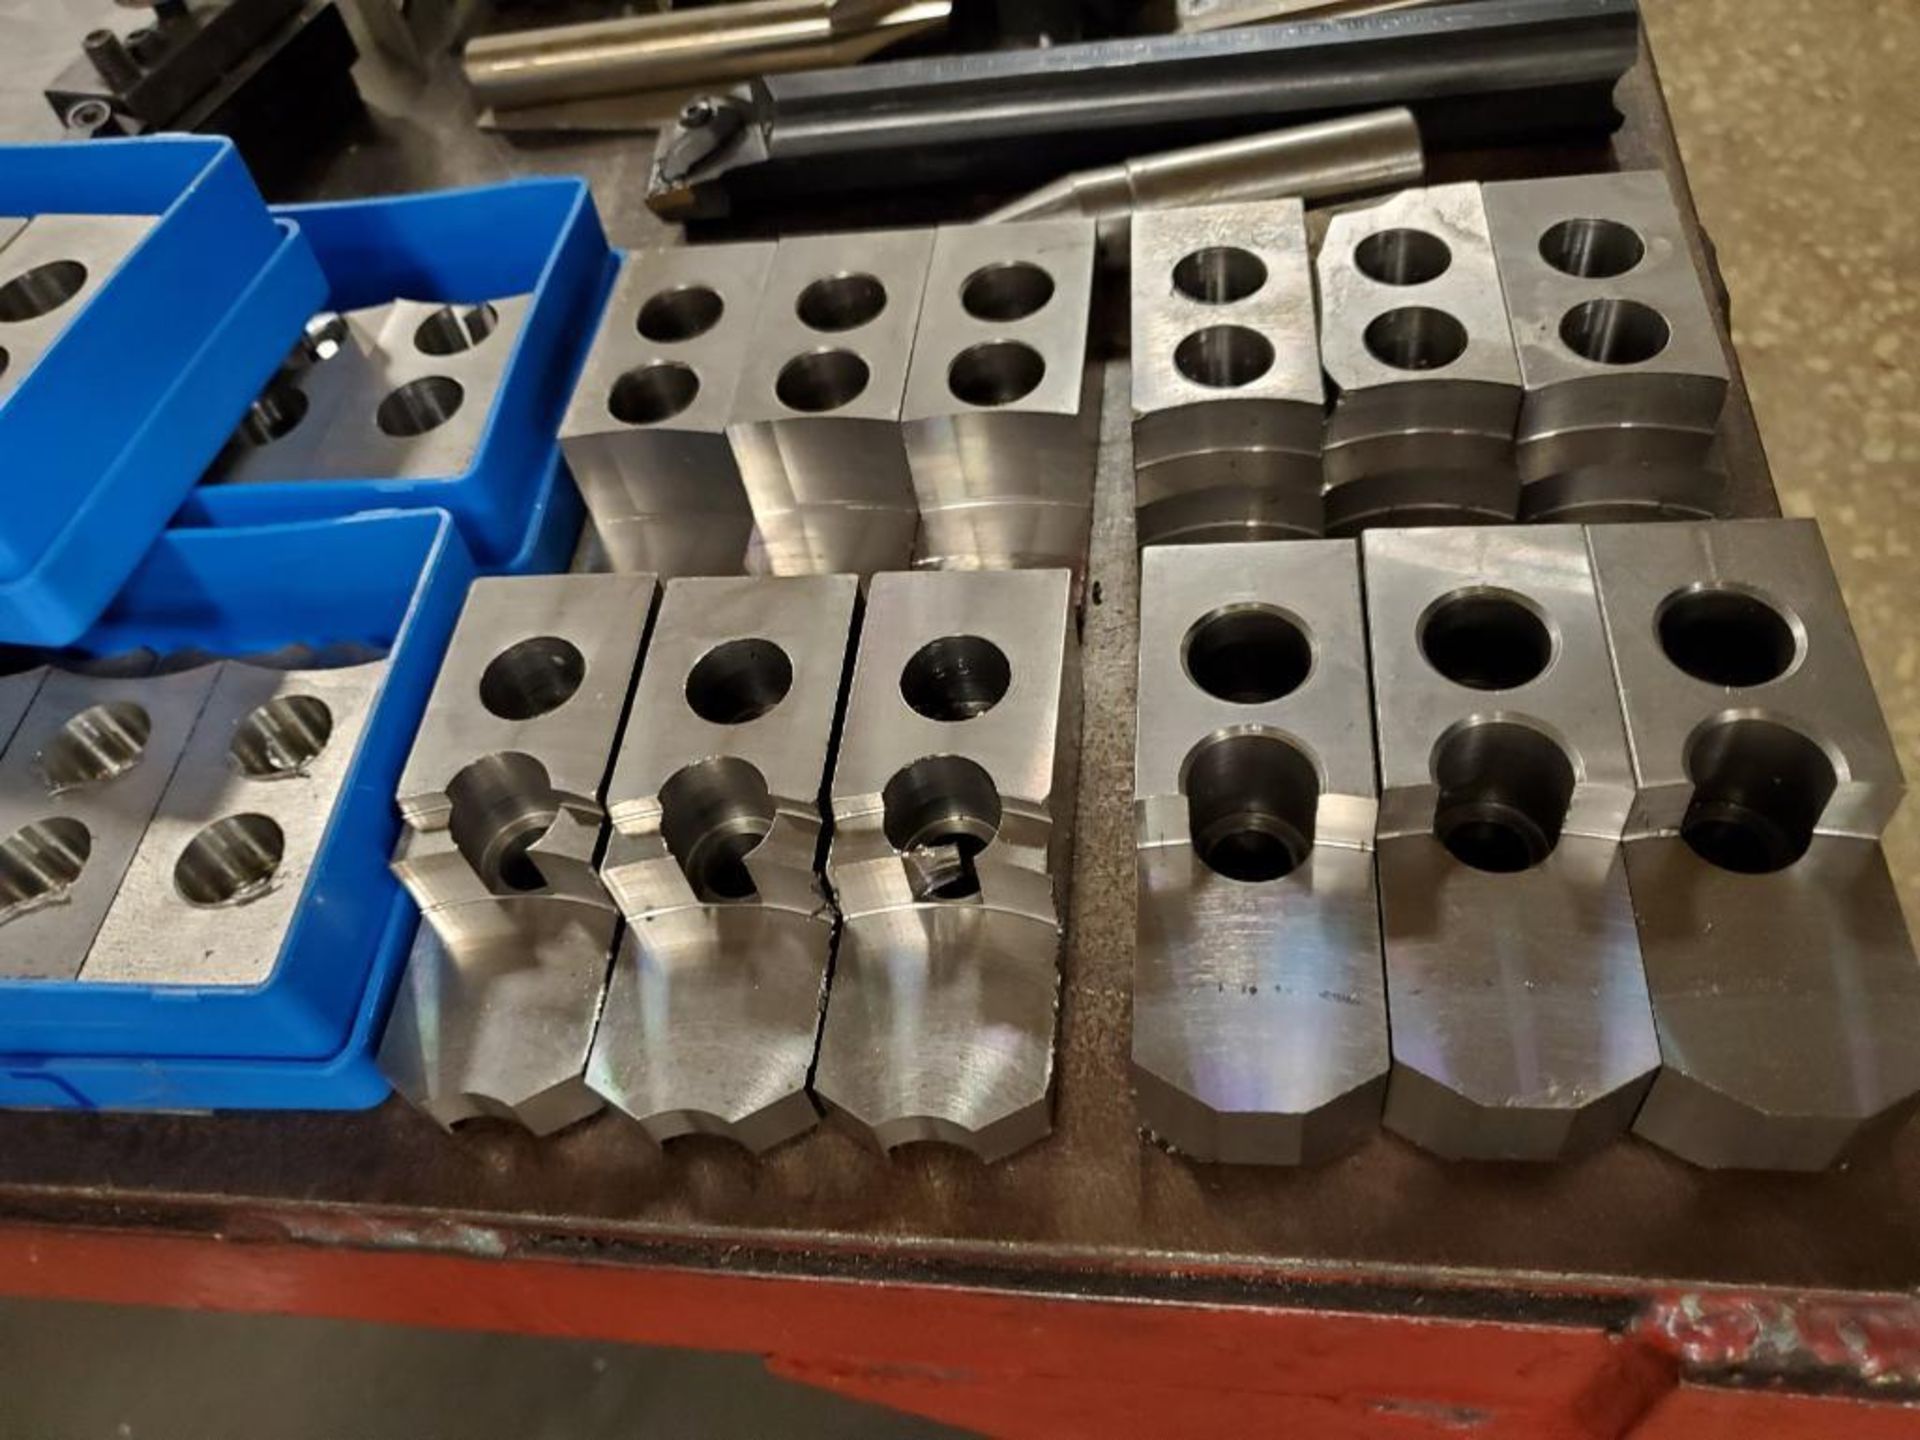 Soft Chuck Jaws, Sets, Cutters, & Misc. Fitting & Holders On Cart (Cart Not Included) - Image 3 of 11